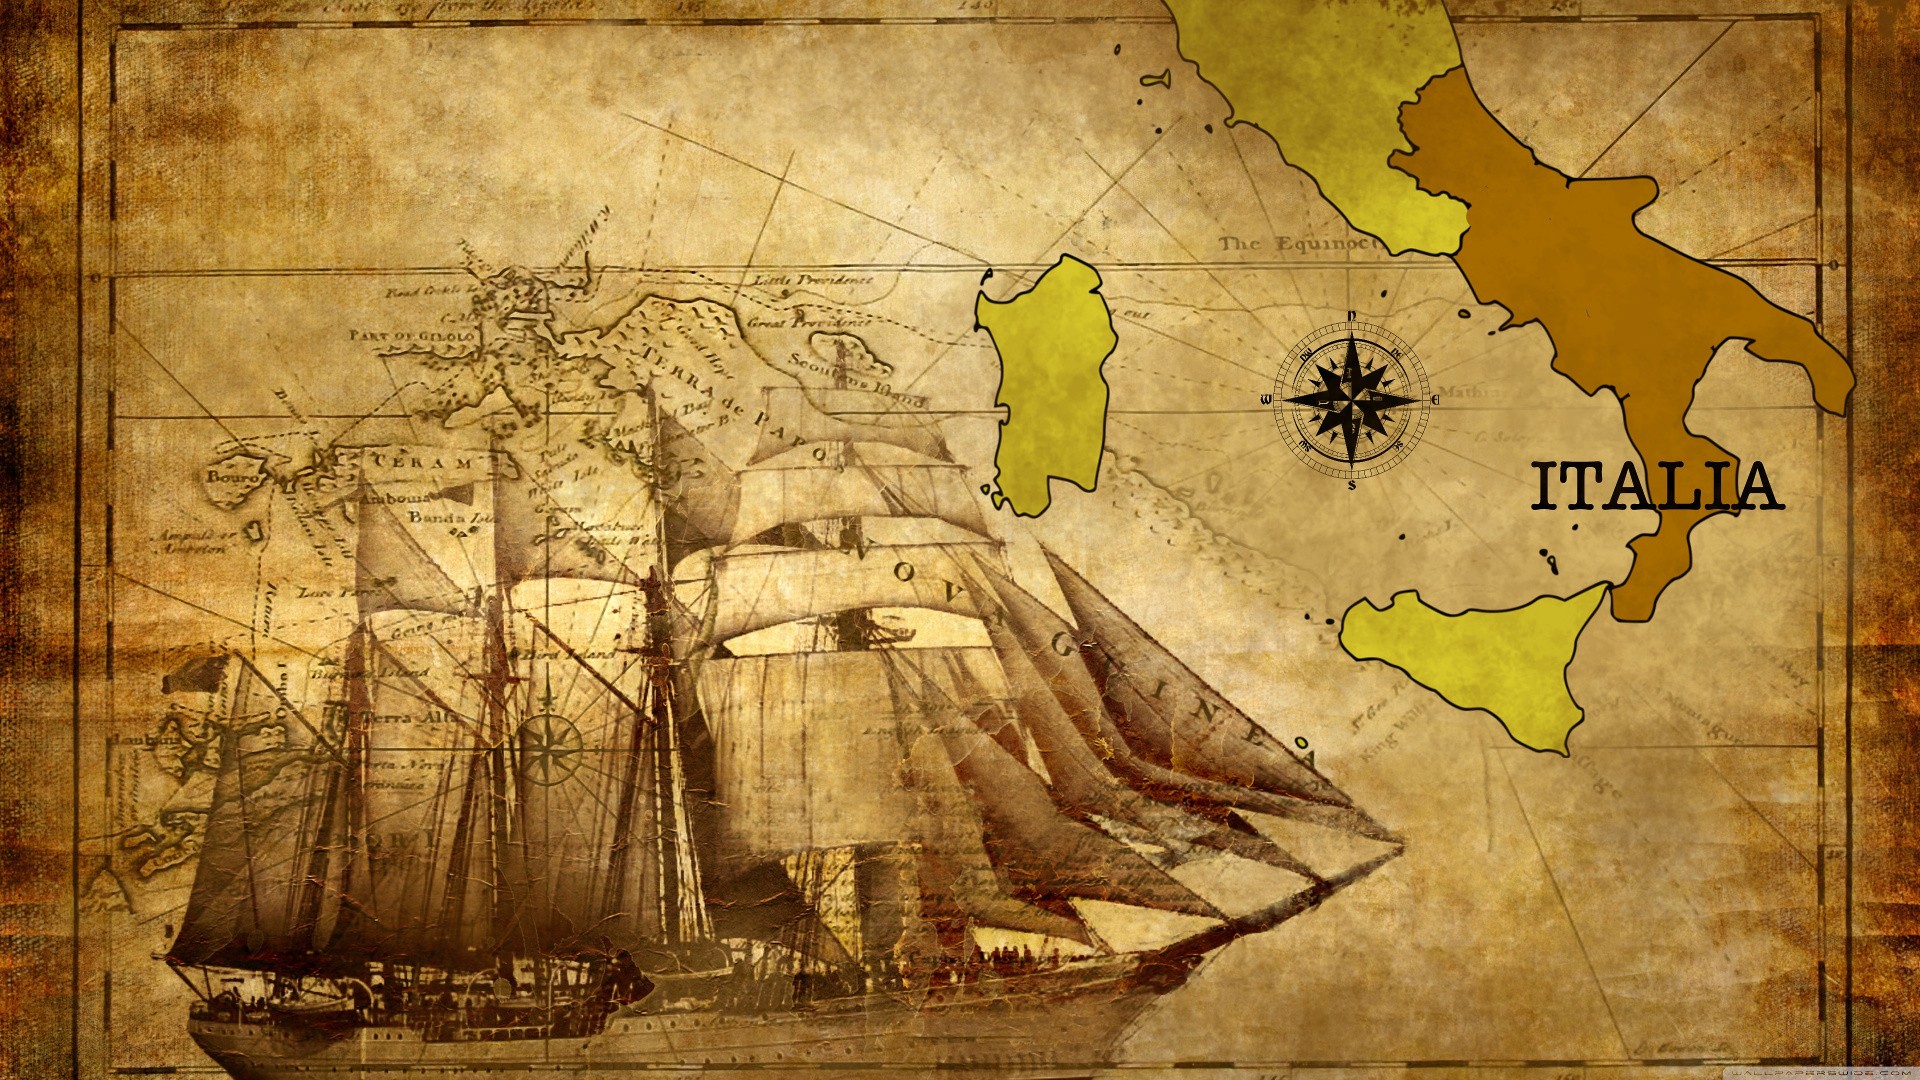 Old Map Italy Historic Compass Vessel Ship 1920x1080